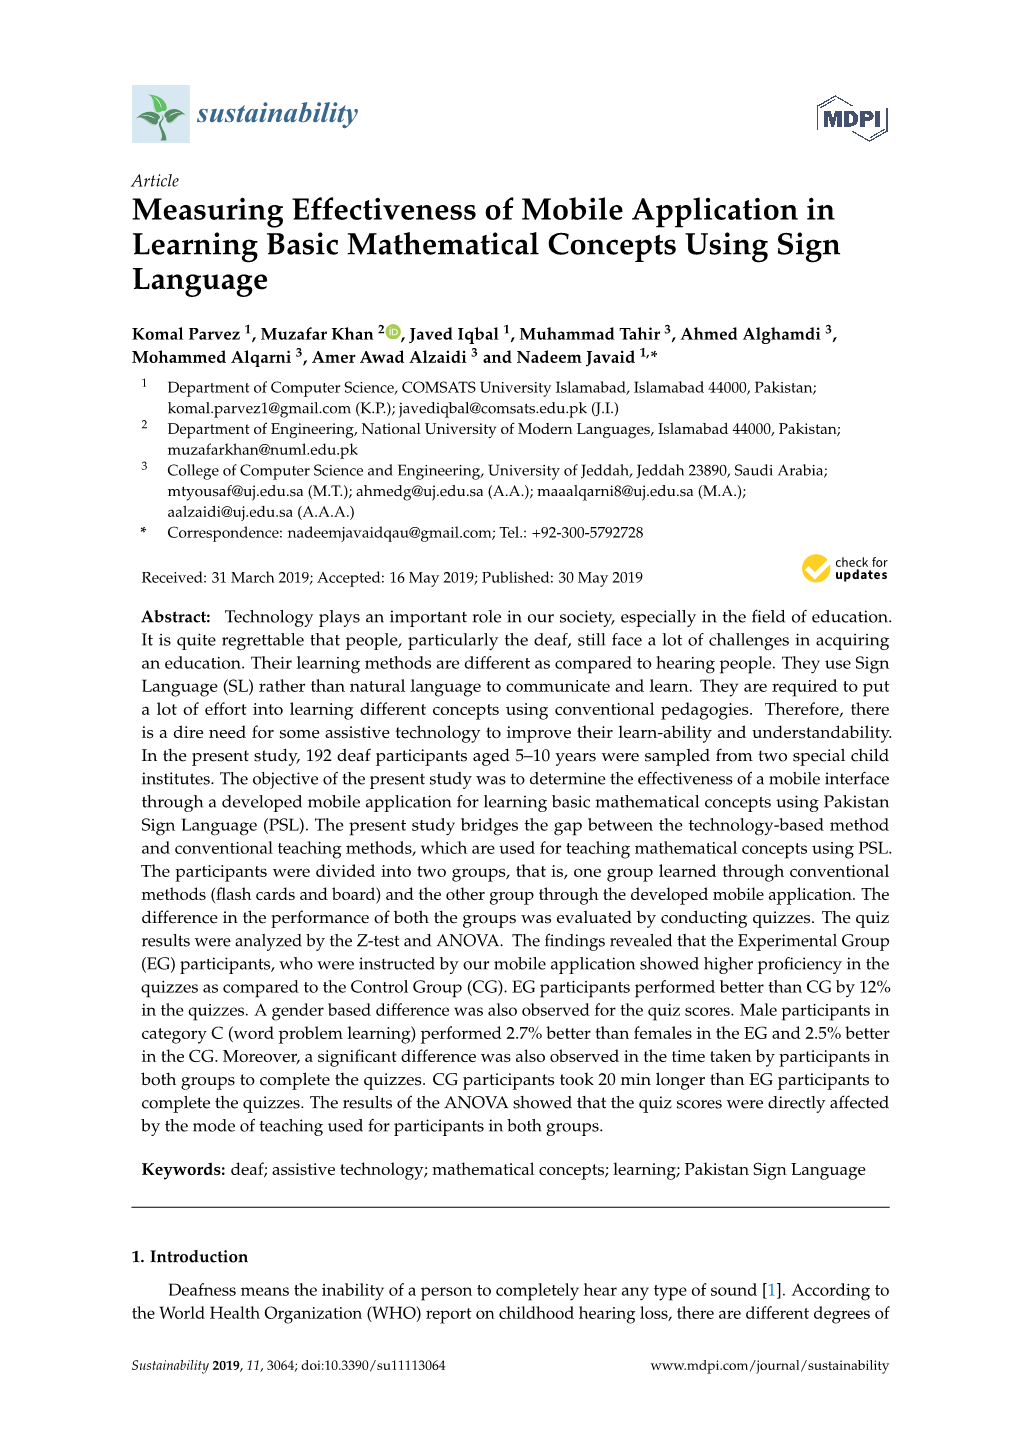 Measuring Effectiveness of Mobile Application in Learning Basic Mathematical Concepts Using Sign Language